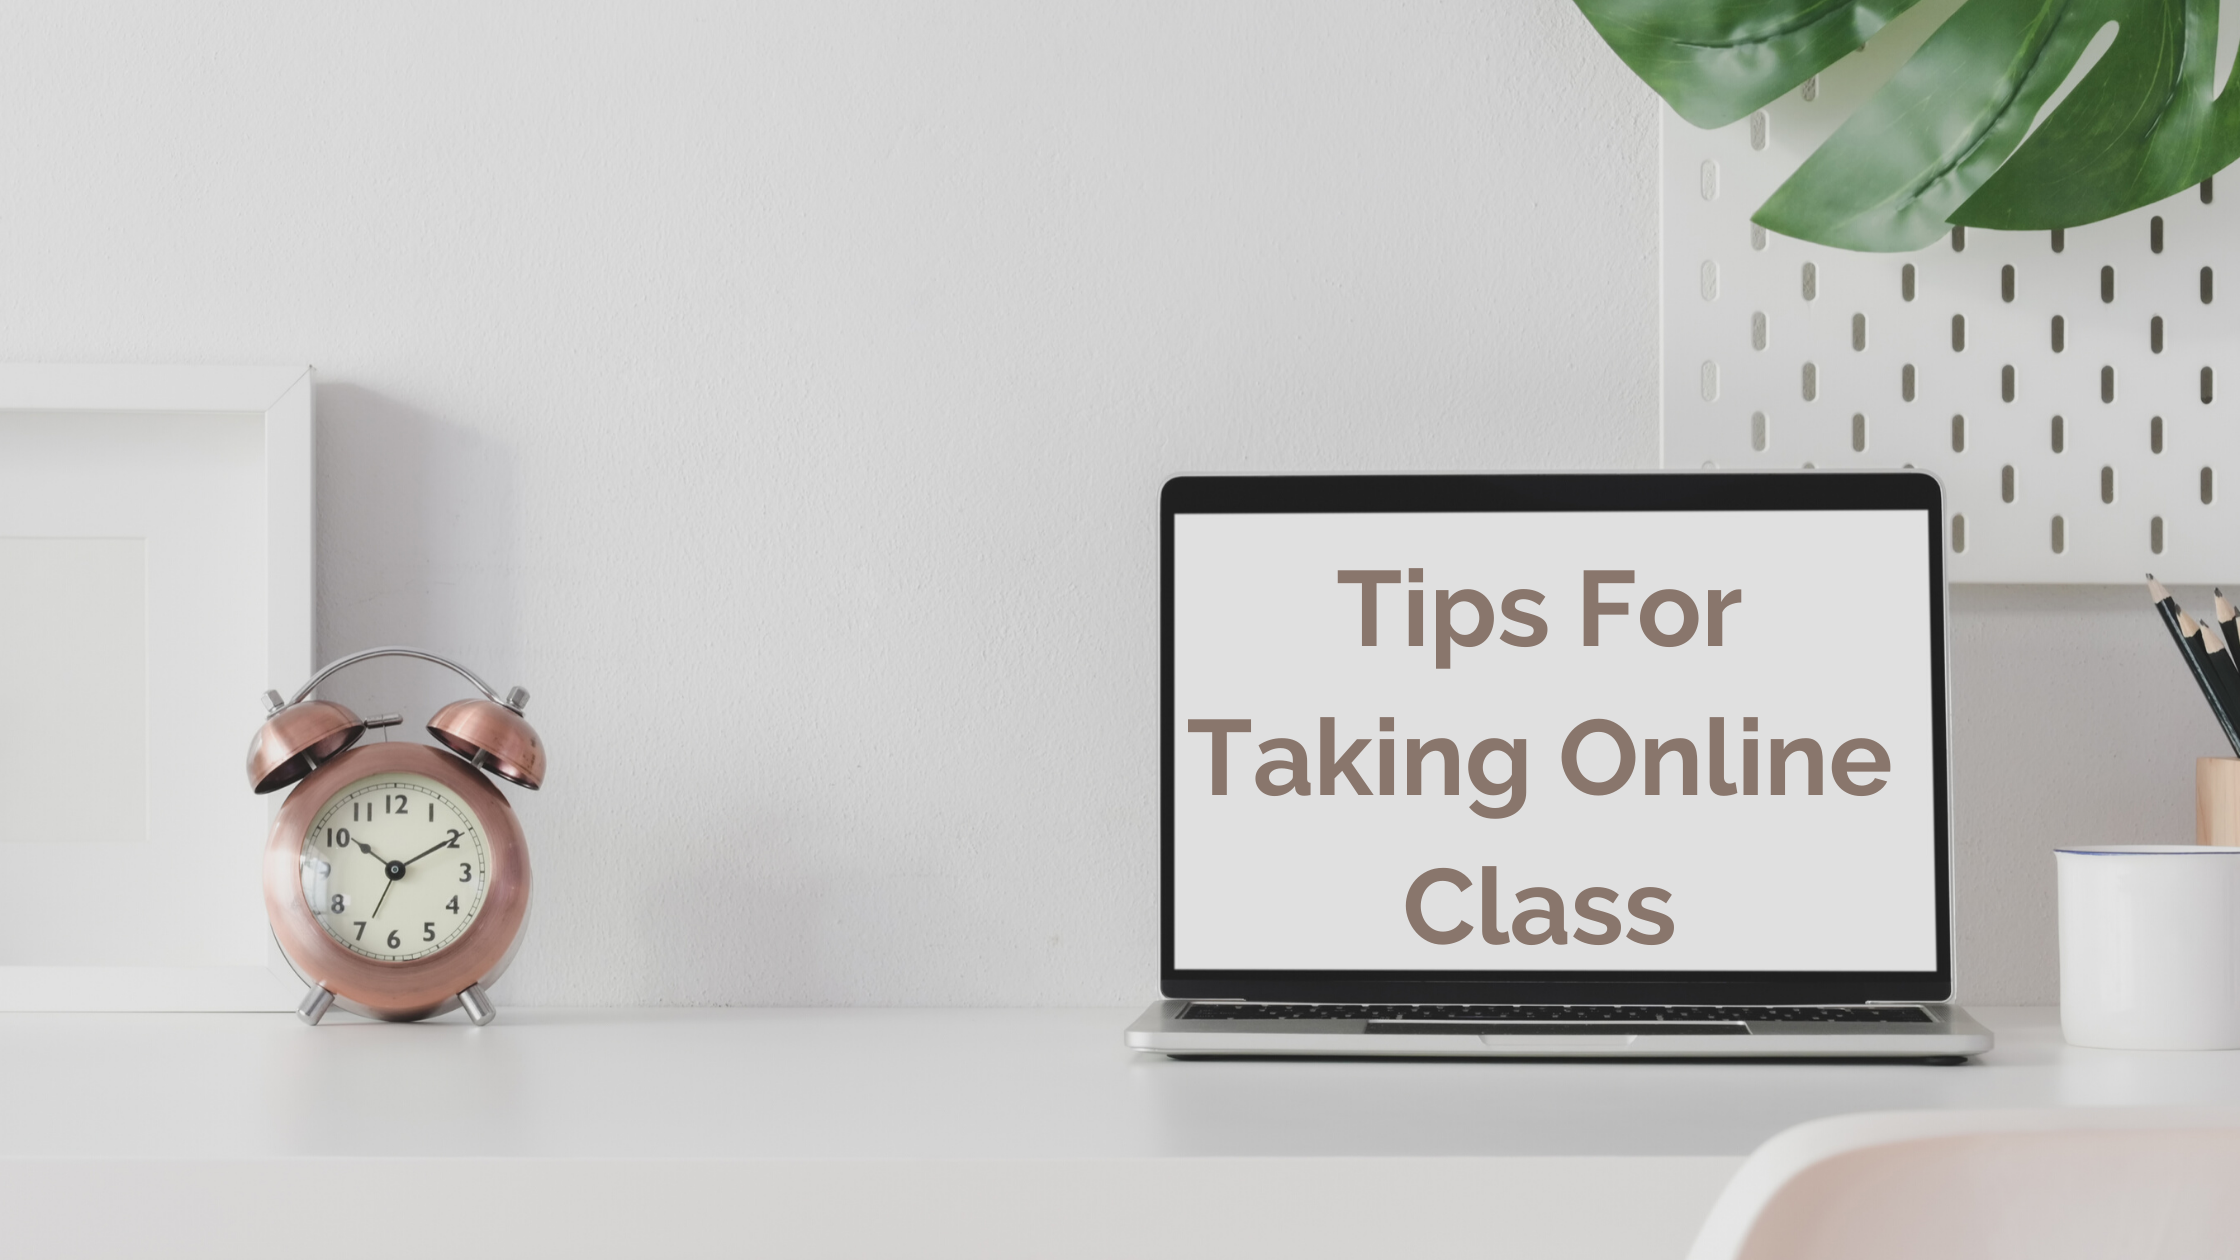 Tips For Taking Online Class